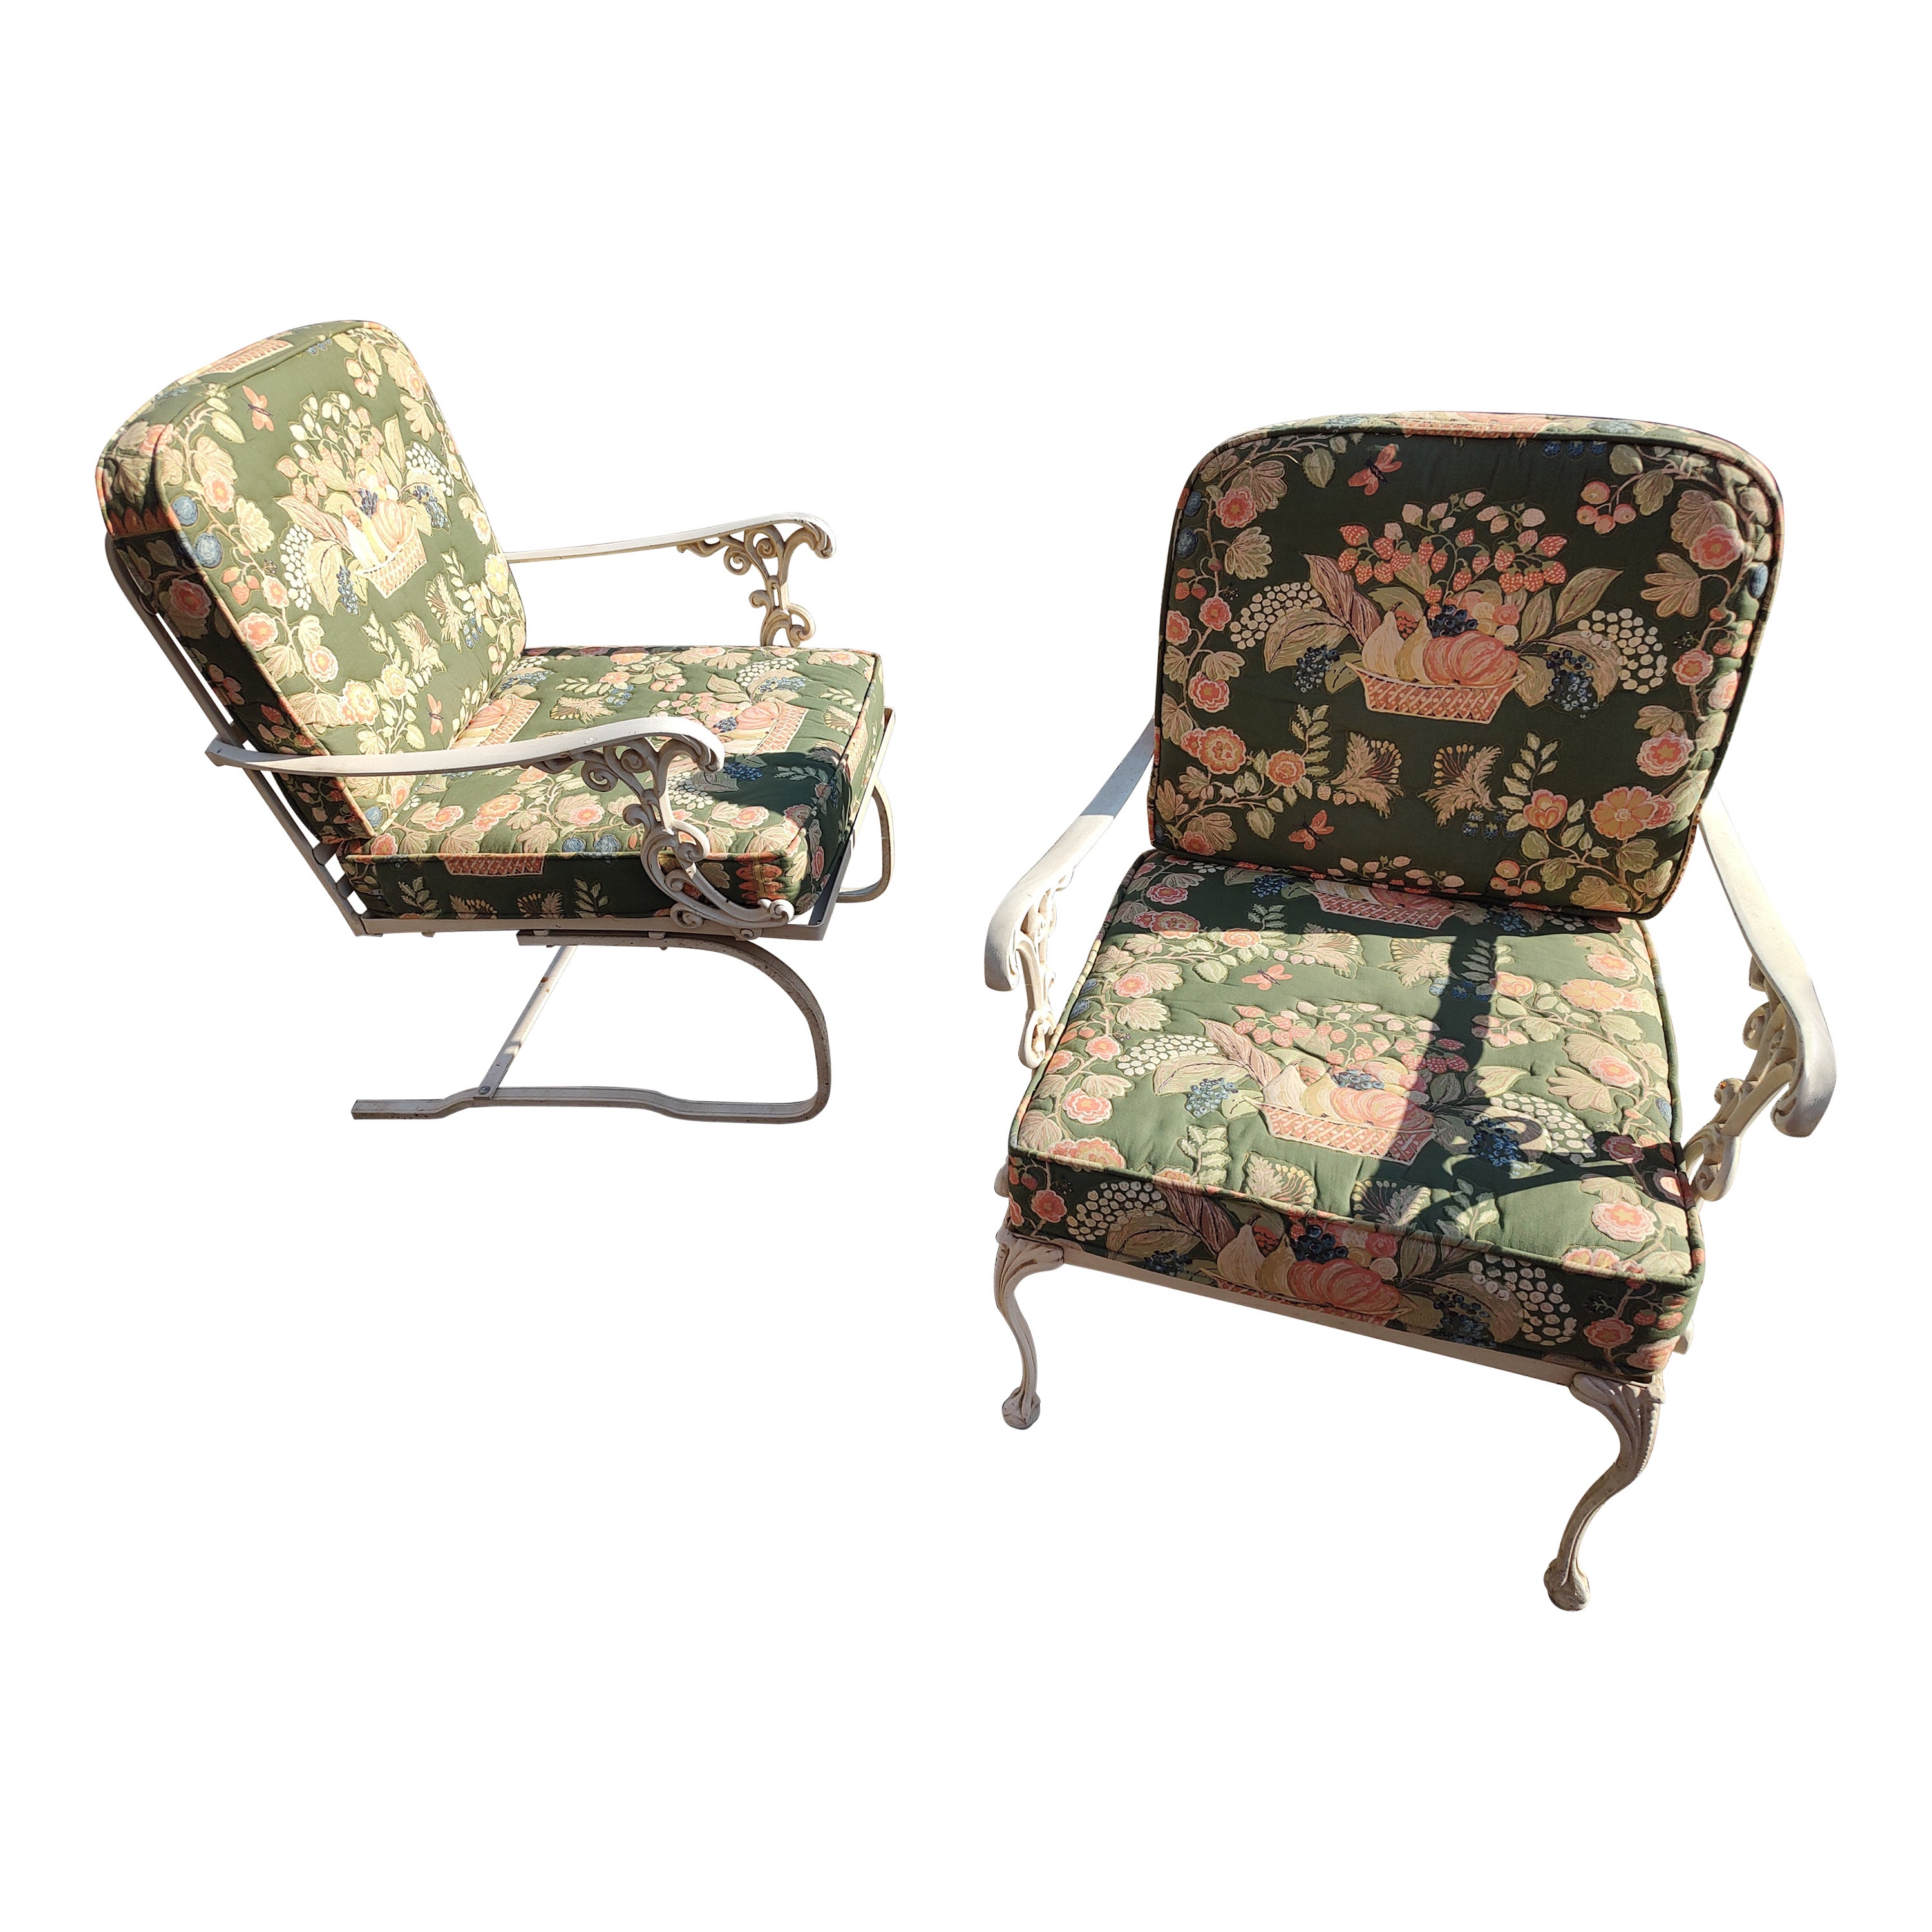 Pair of Molla Garden Lounge Chairs Cast Aluminum with Embossed Pattern Cushions